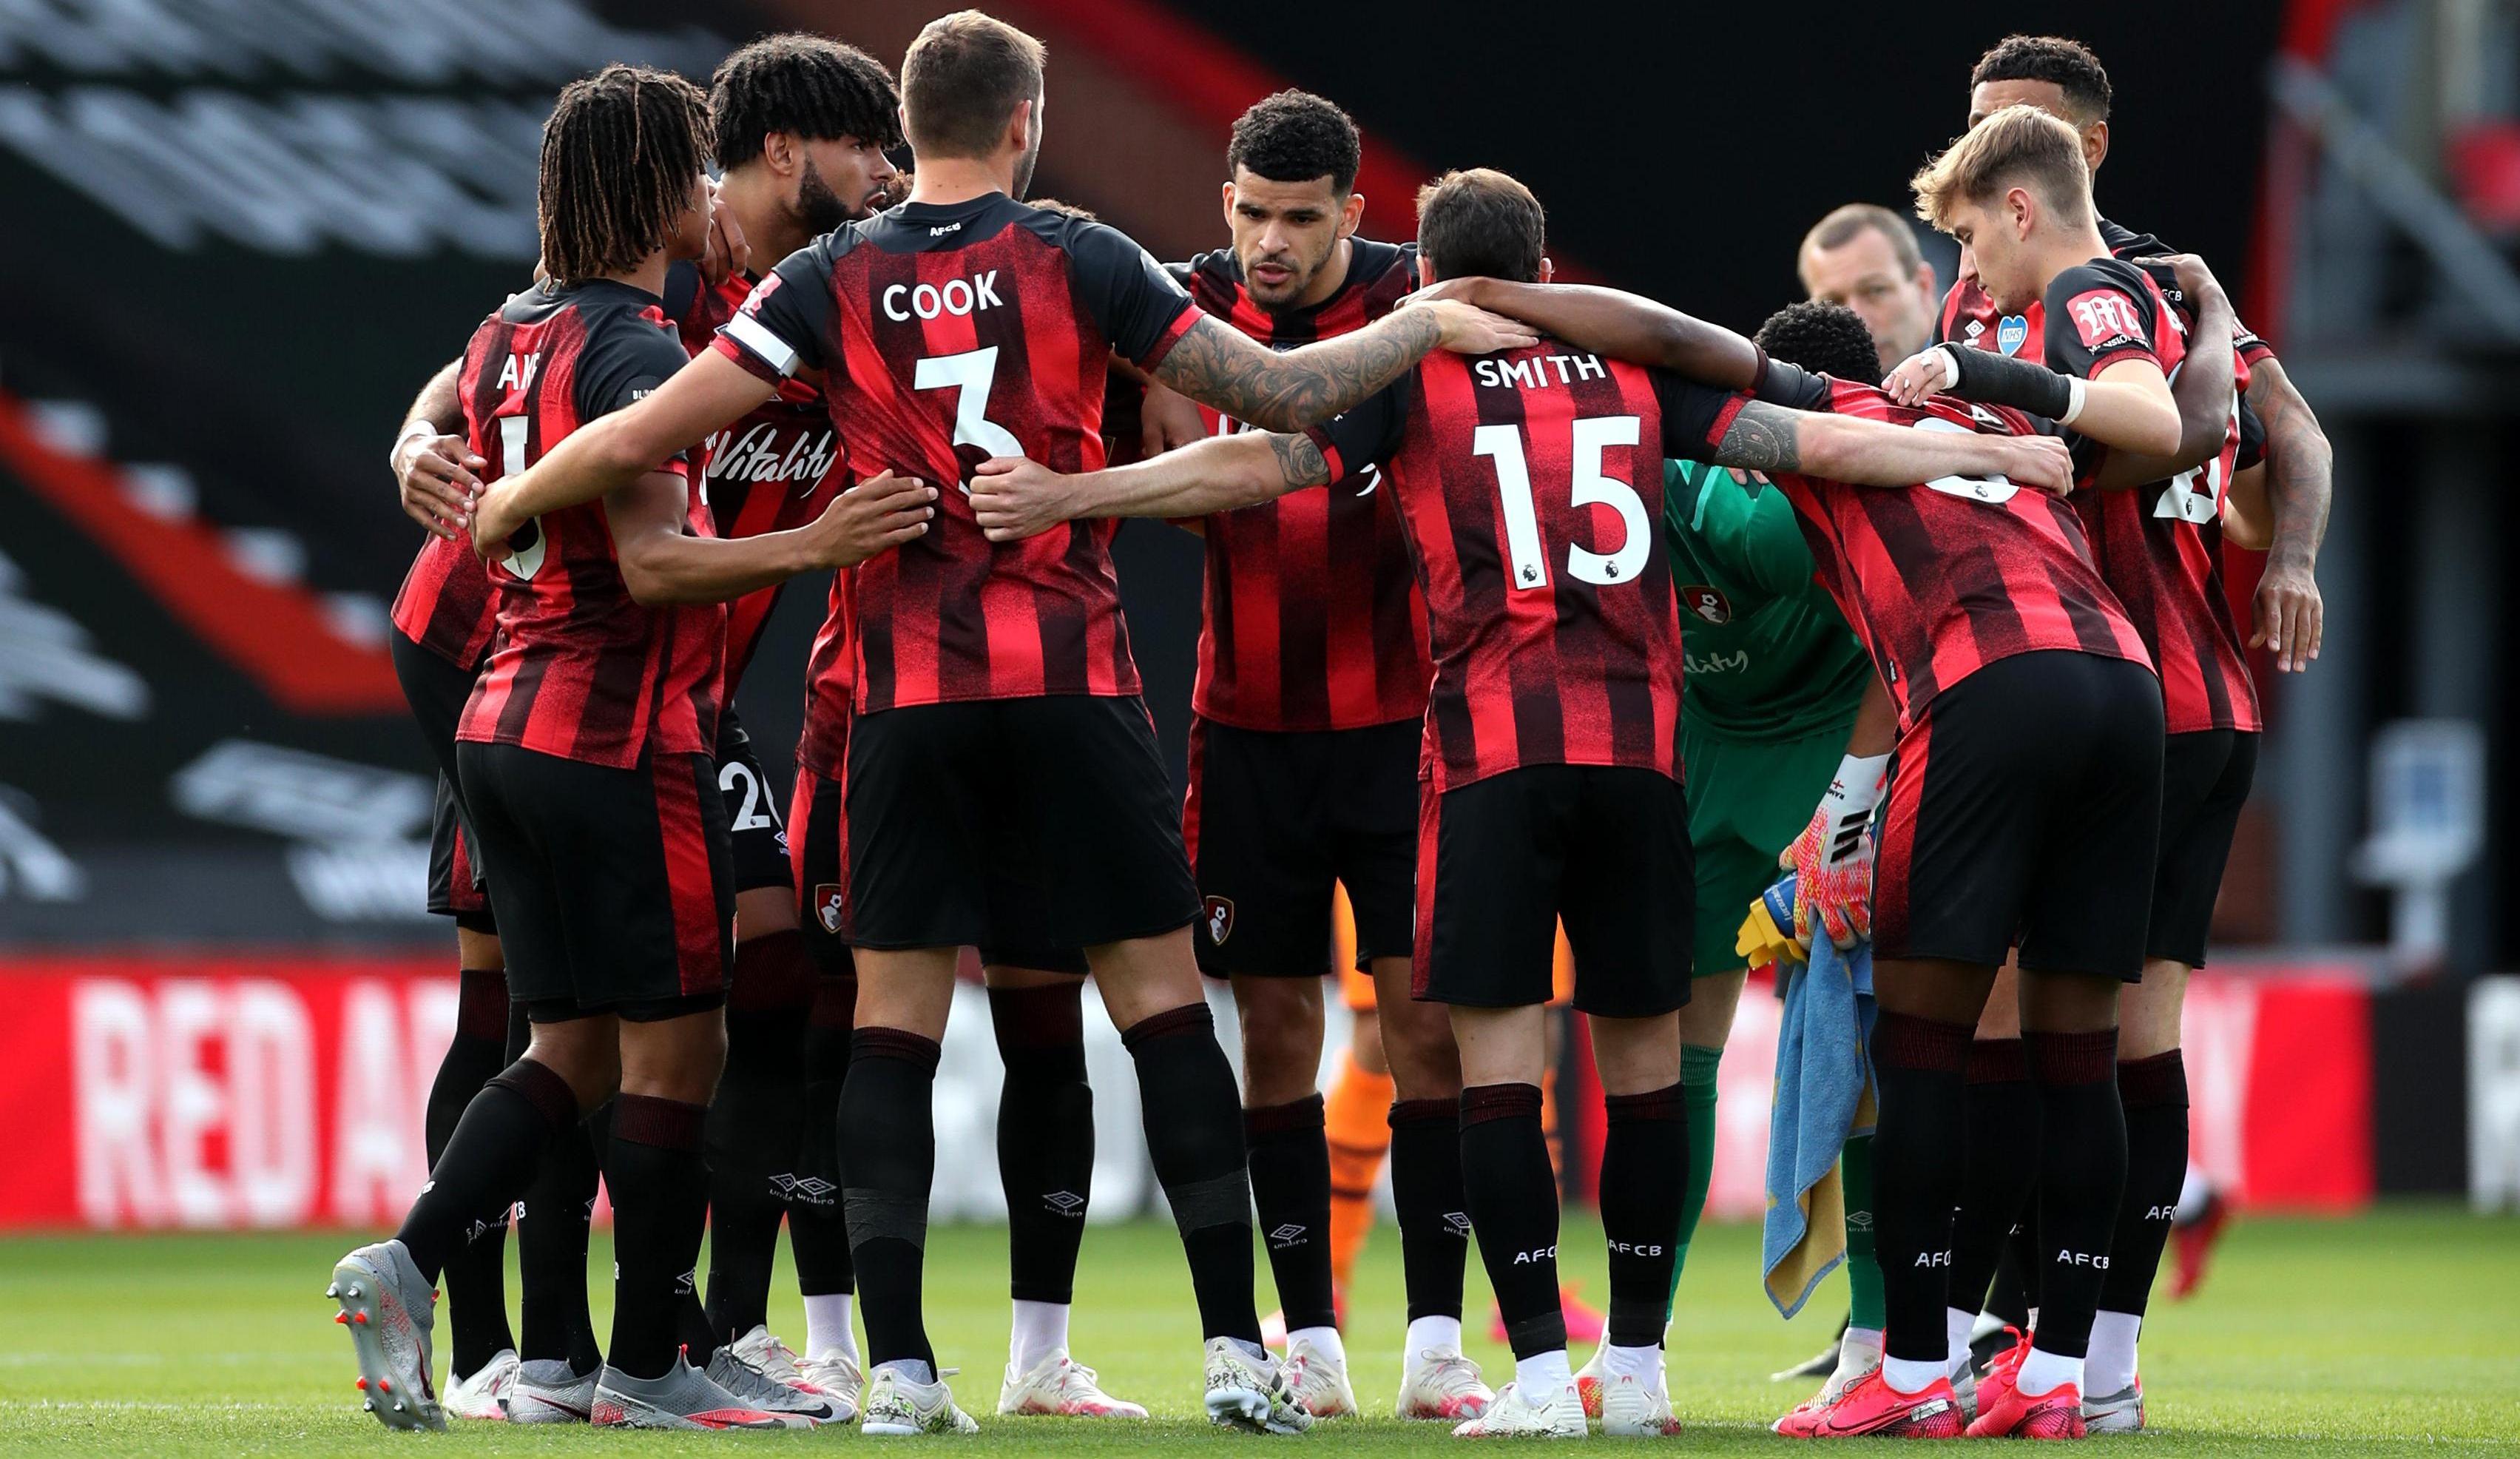 15 Facts About AFC Bournemouth - Facts.net